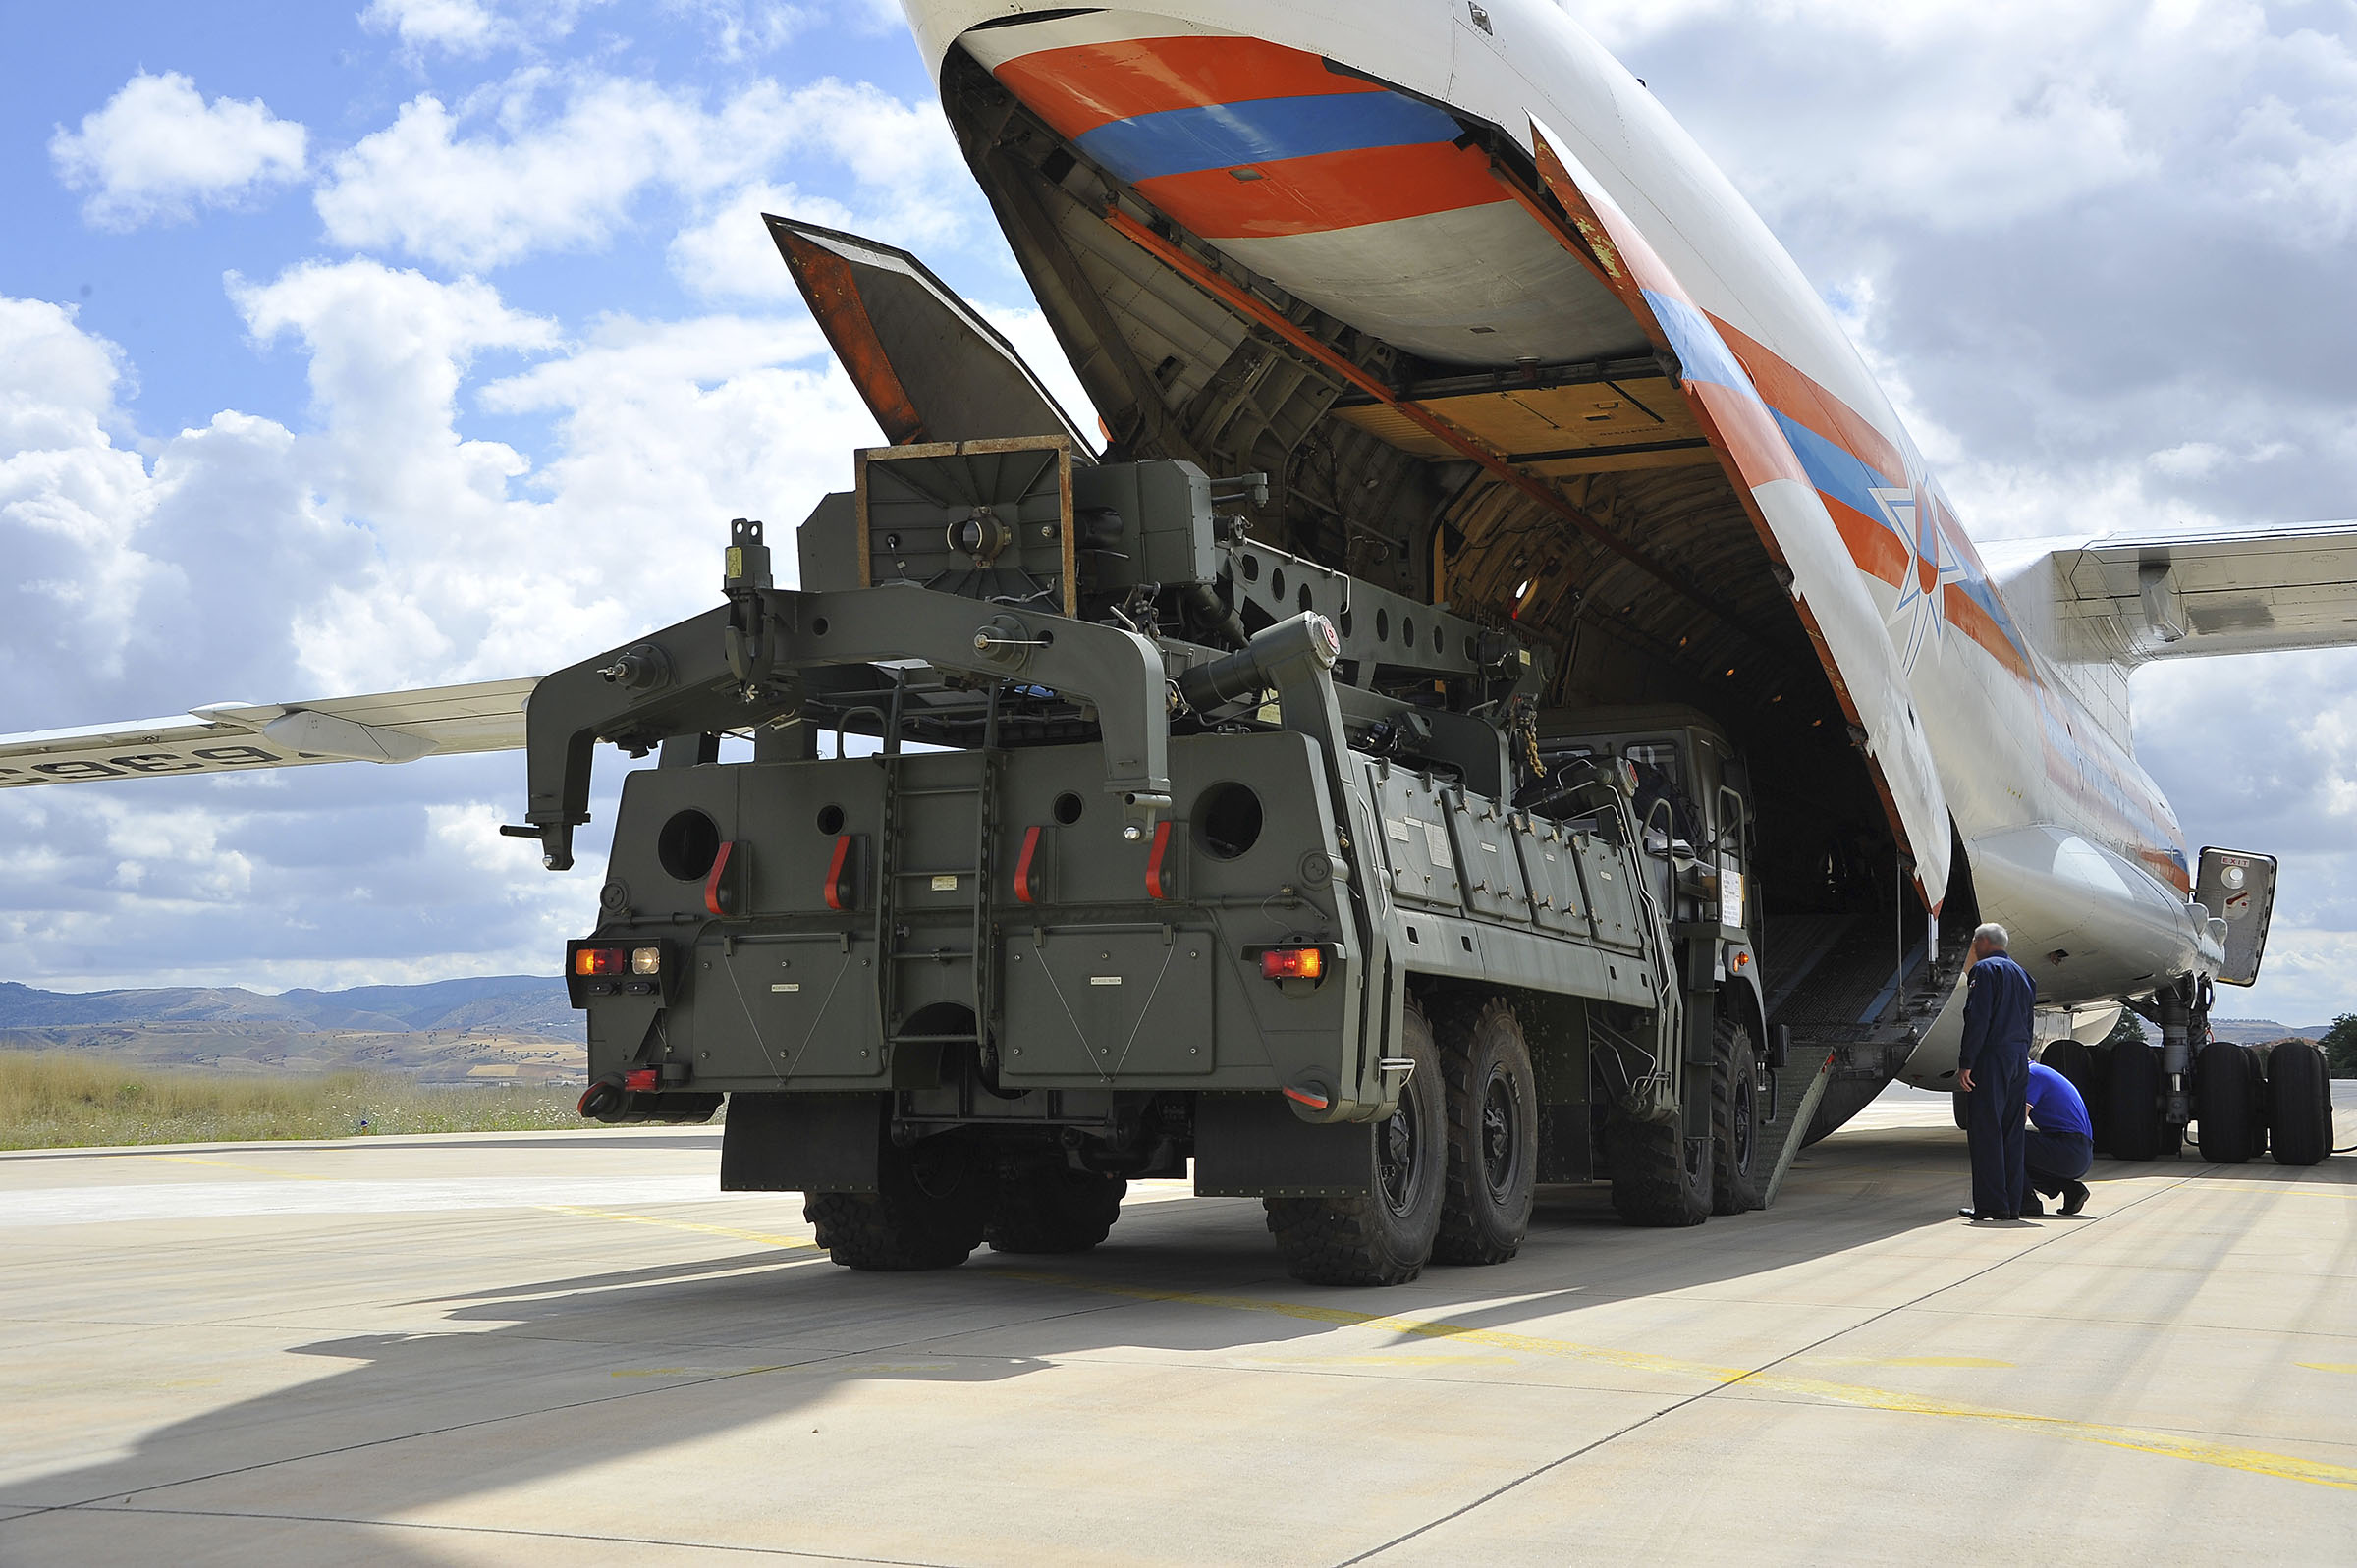 Military vehicles and equipment, parts of the S-400 air defense systems, are unloaded from a Russian transport aircraft, at Murted military airport in Ankara, Turkey on July 12, 2019. (Turkish Defence Ministry via AP)